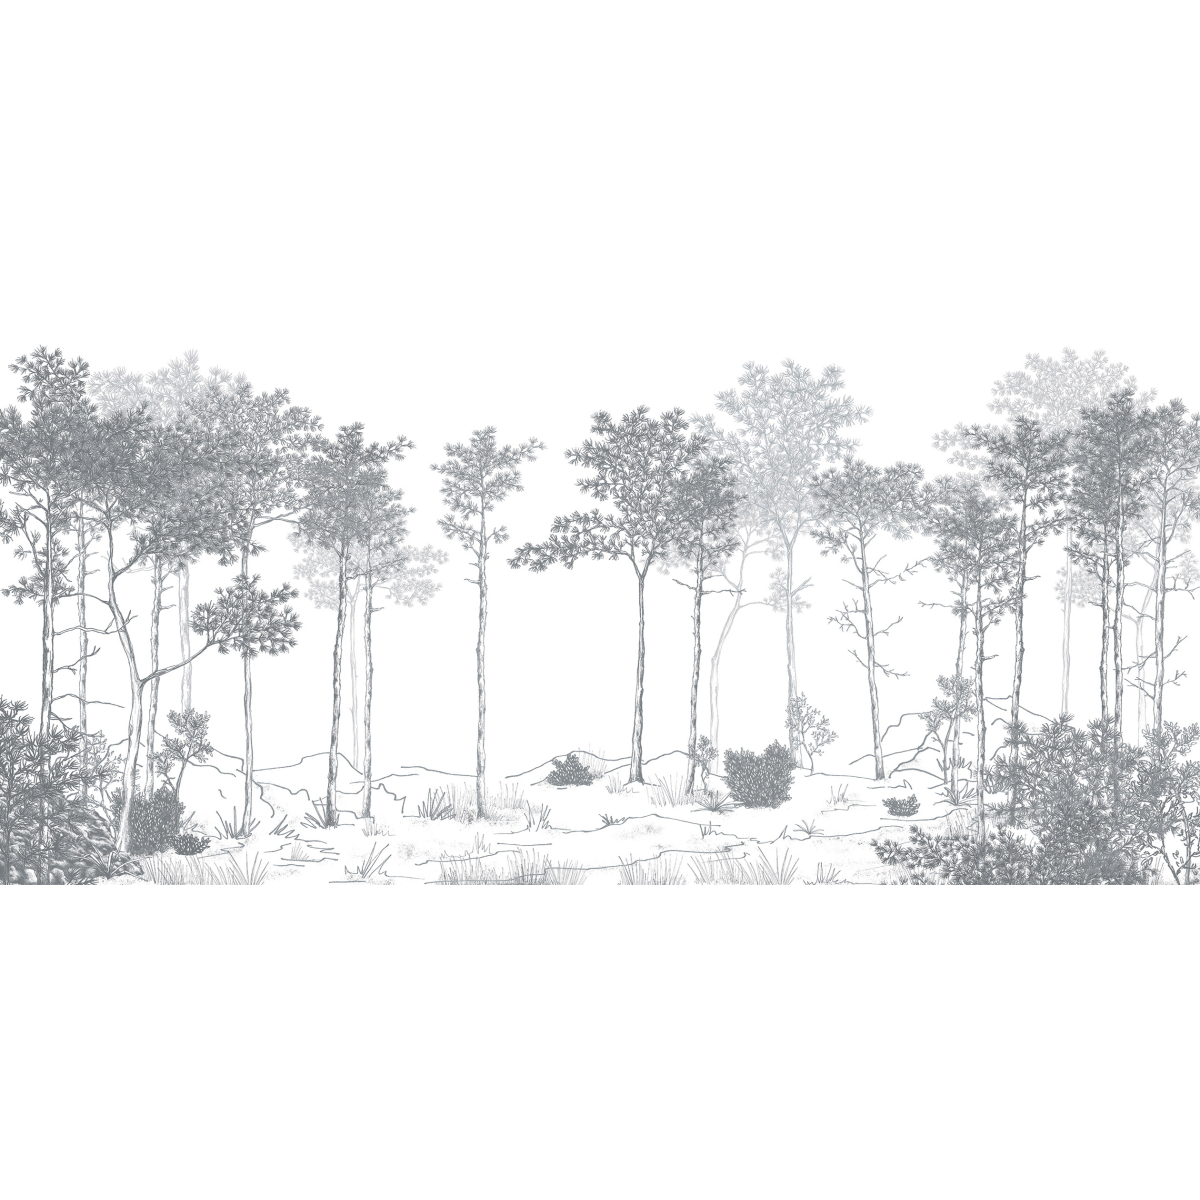 Panoramic wallpaper Walk in the woods - Lulu au crayon Collection - Acte-Deco